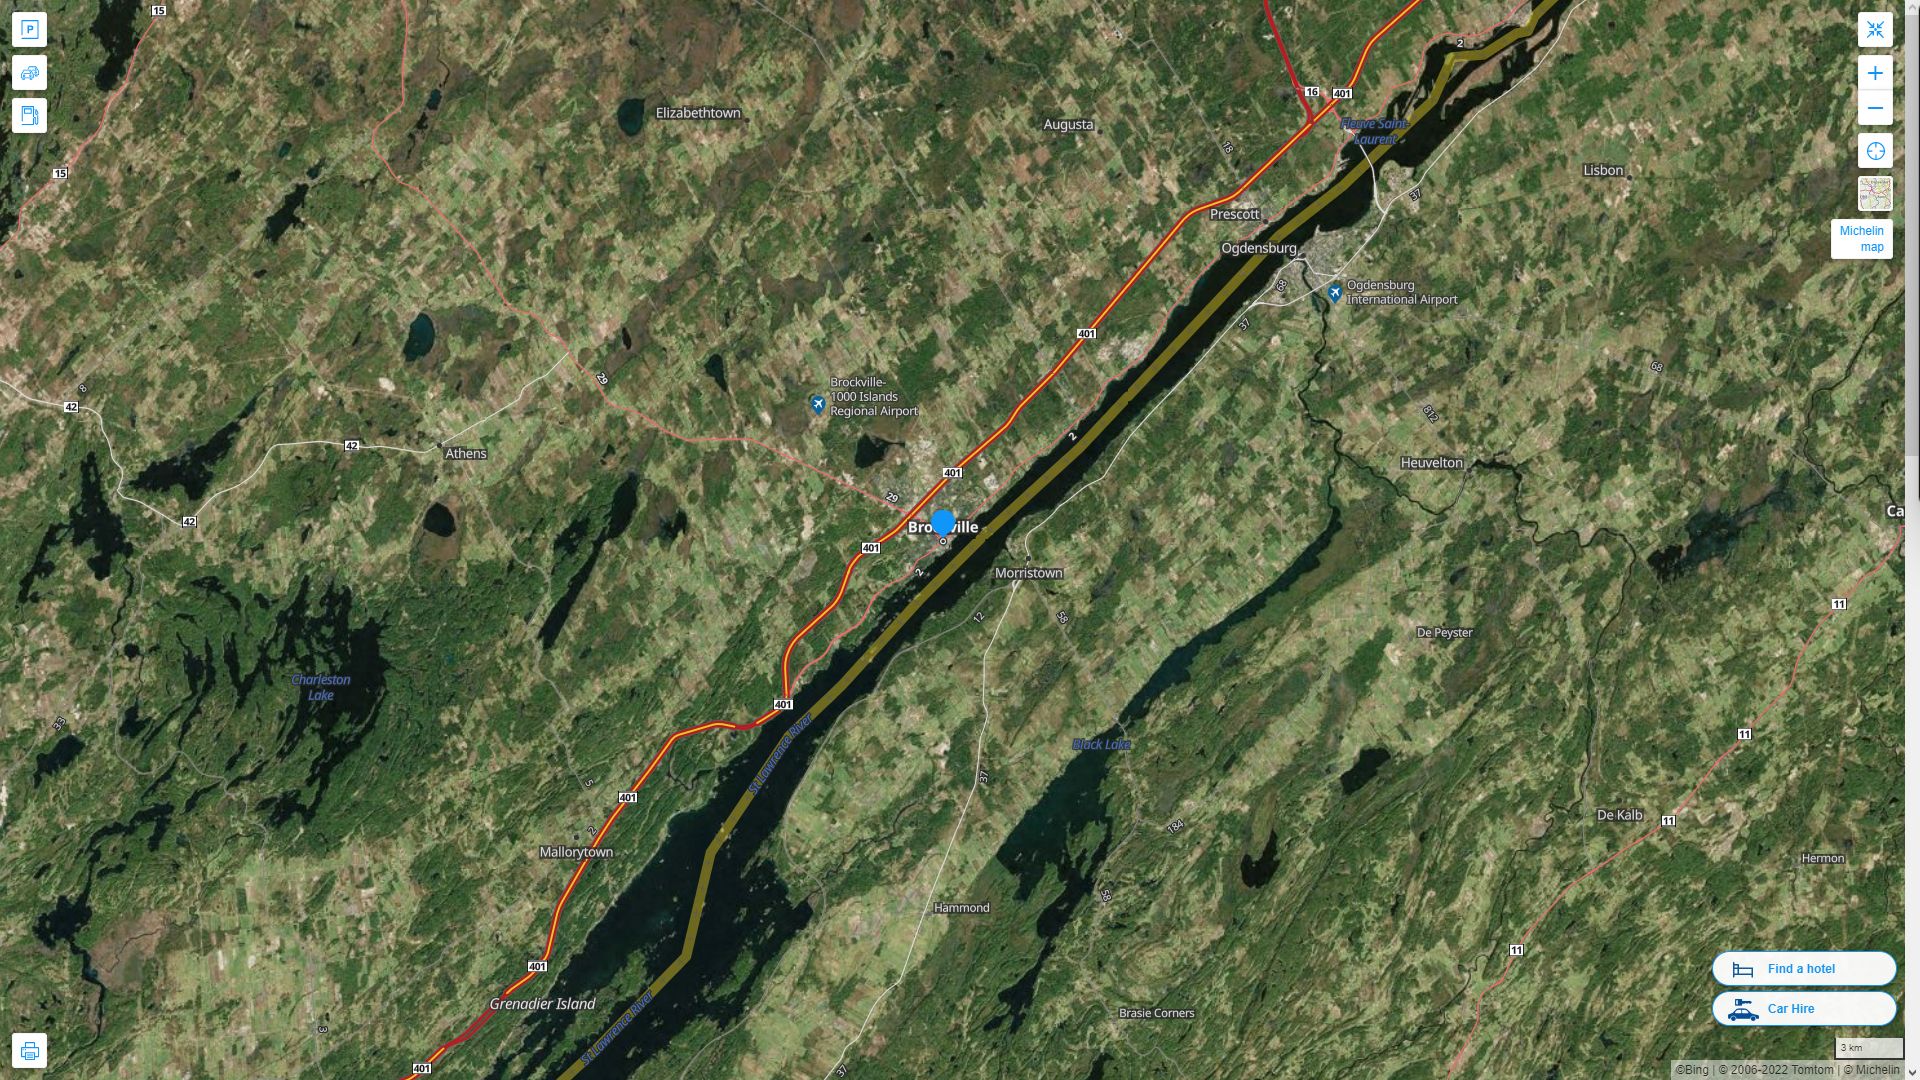 Brockville Highway and Road Map with Satellite View